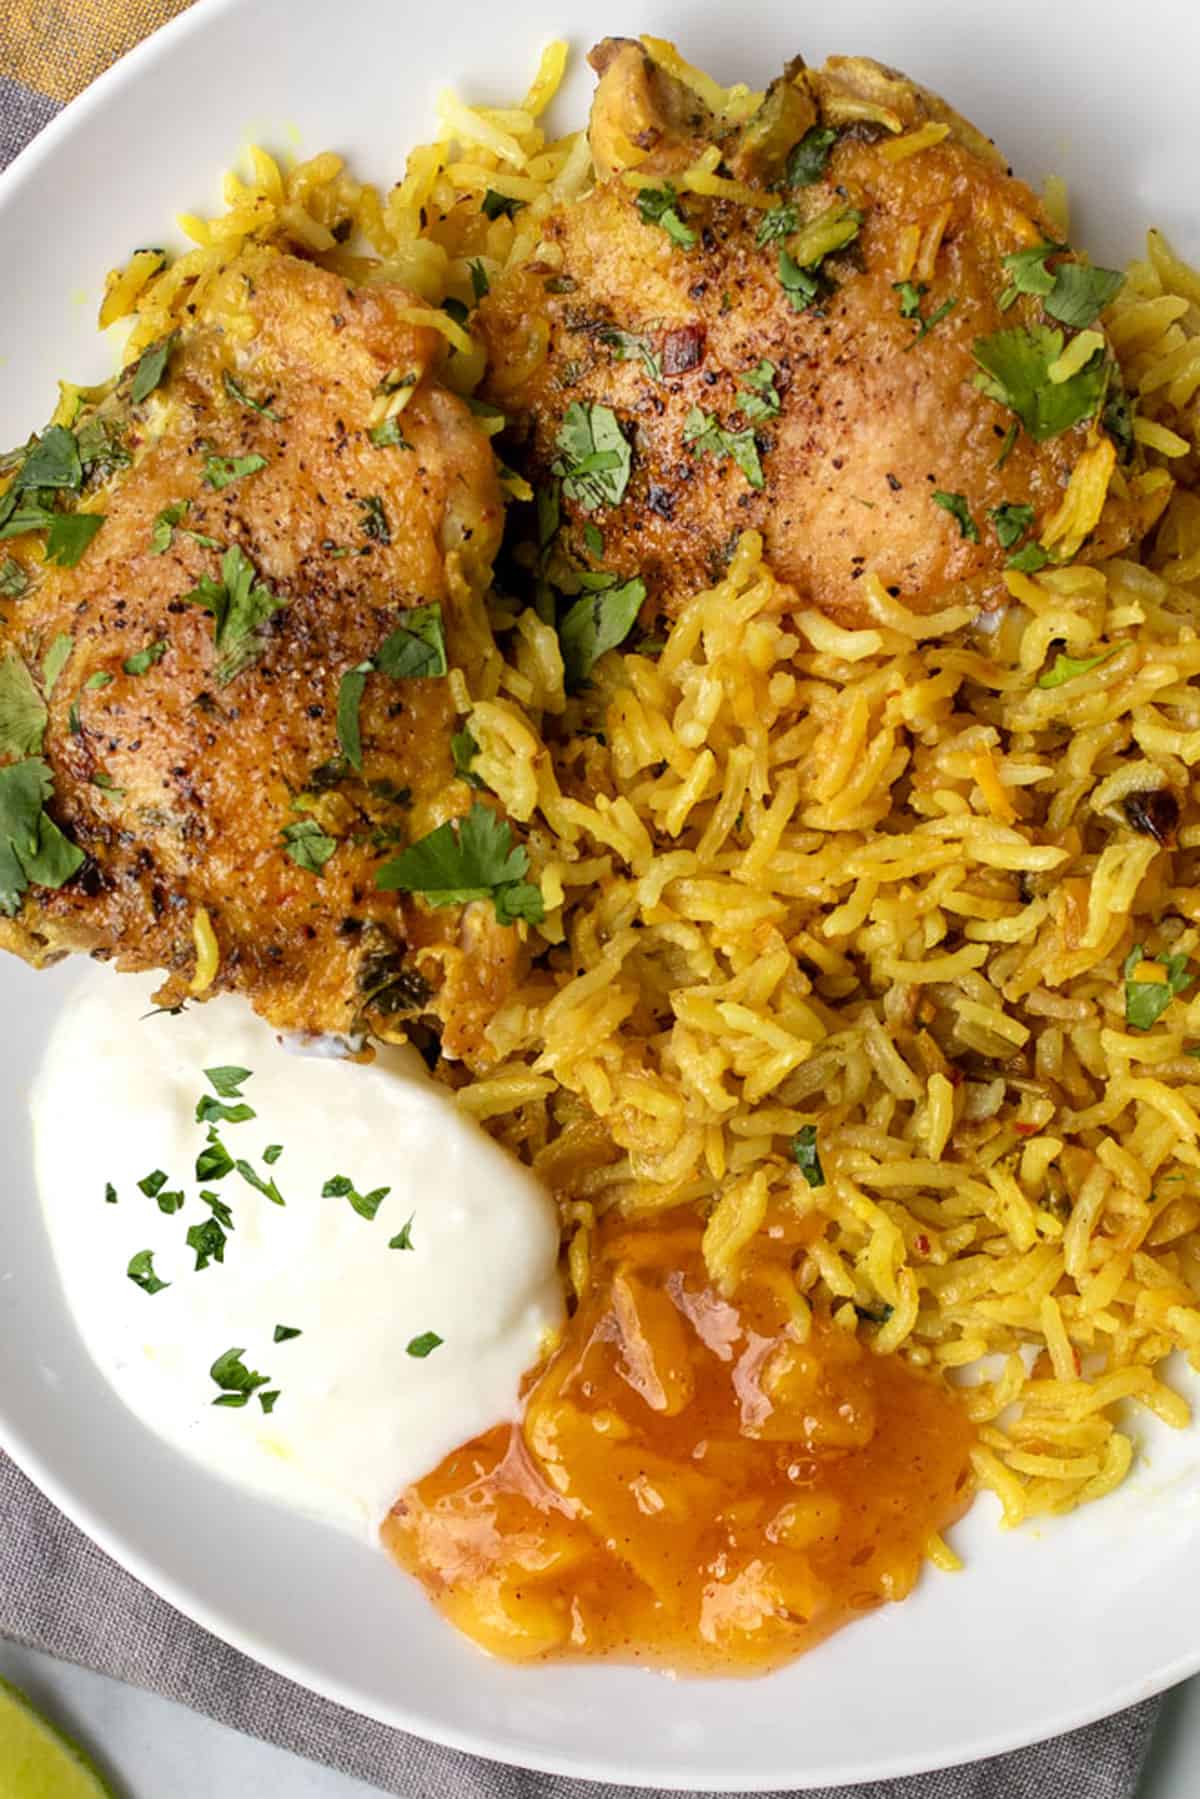 Two golden brown baked chicken thighs next to a bed of fluffy turmeric colored rice, all topped with chopped cilantro, with a small blob of yogurt and small blob of mango chutney on the plate.